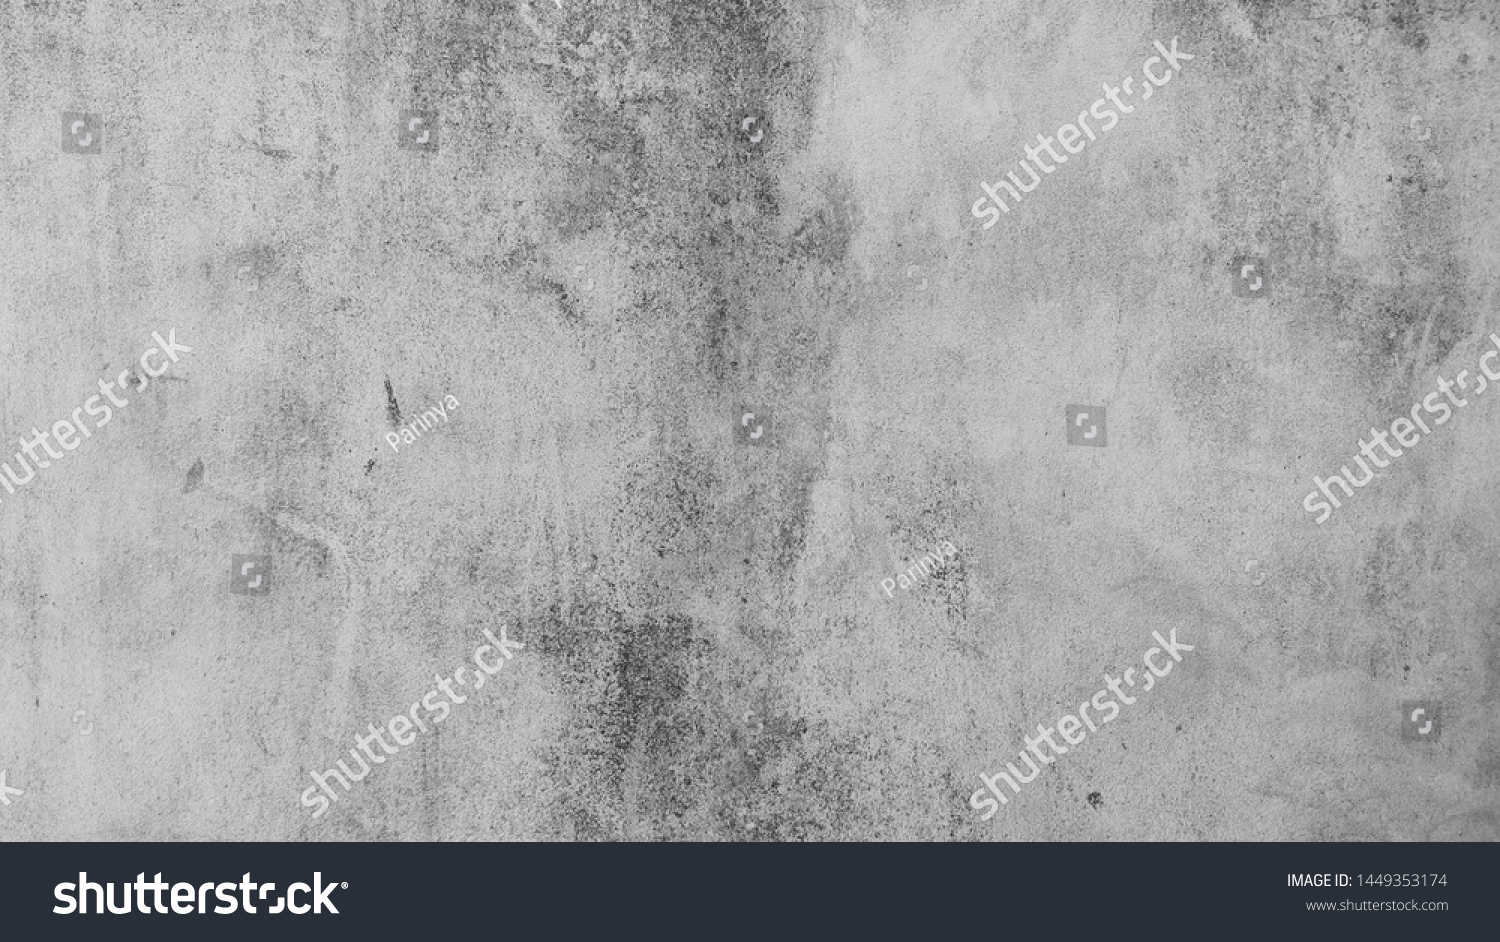 old gray concrete texture wall  #1449353174